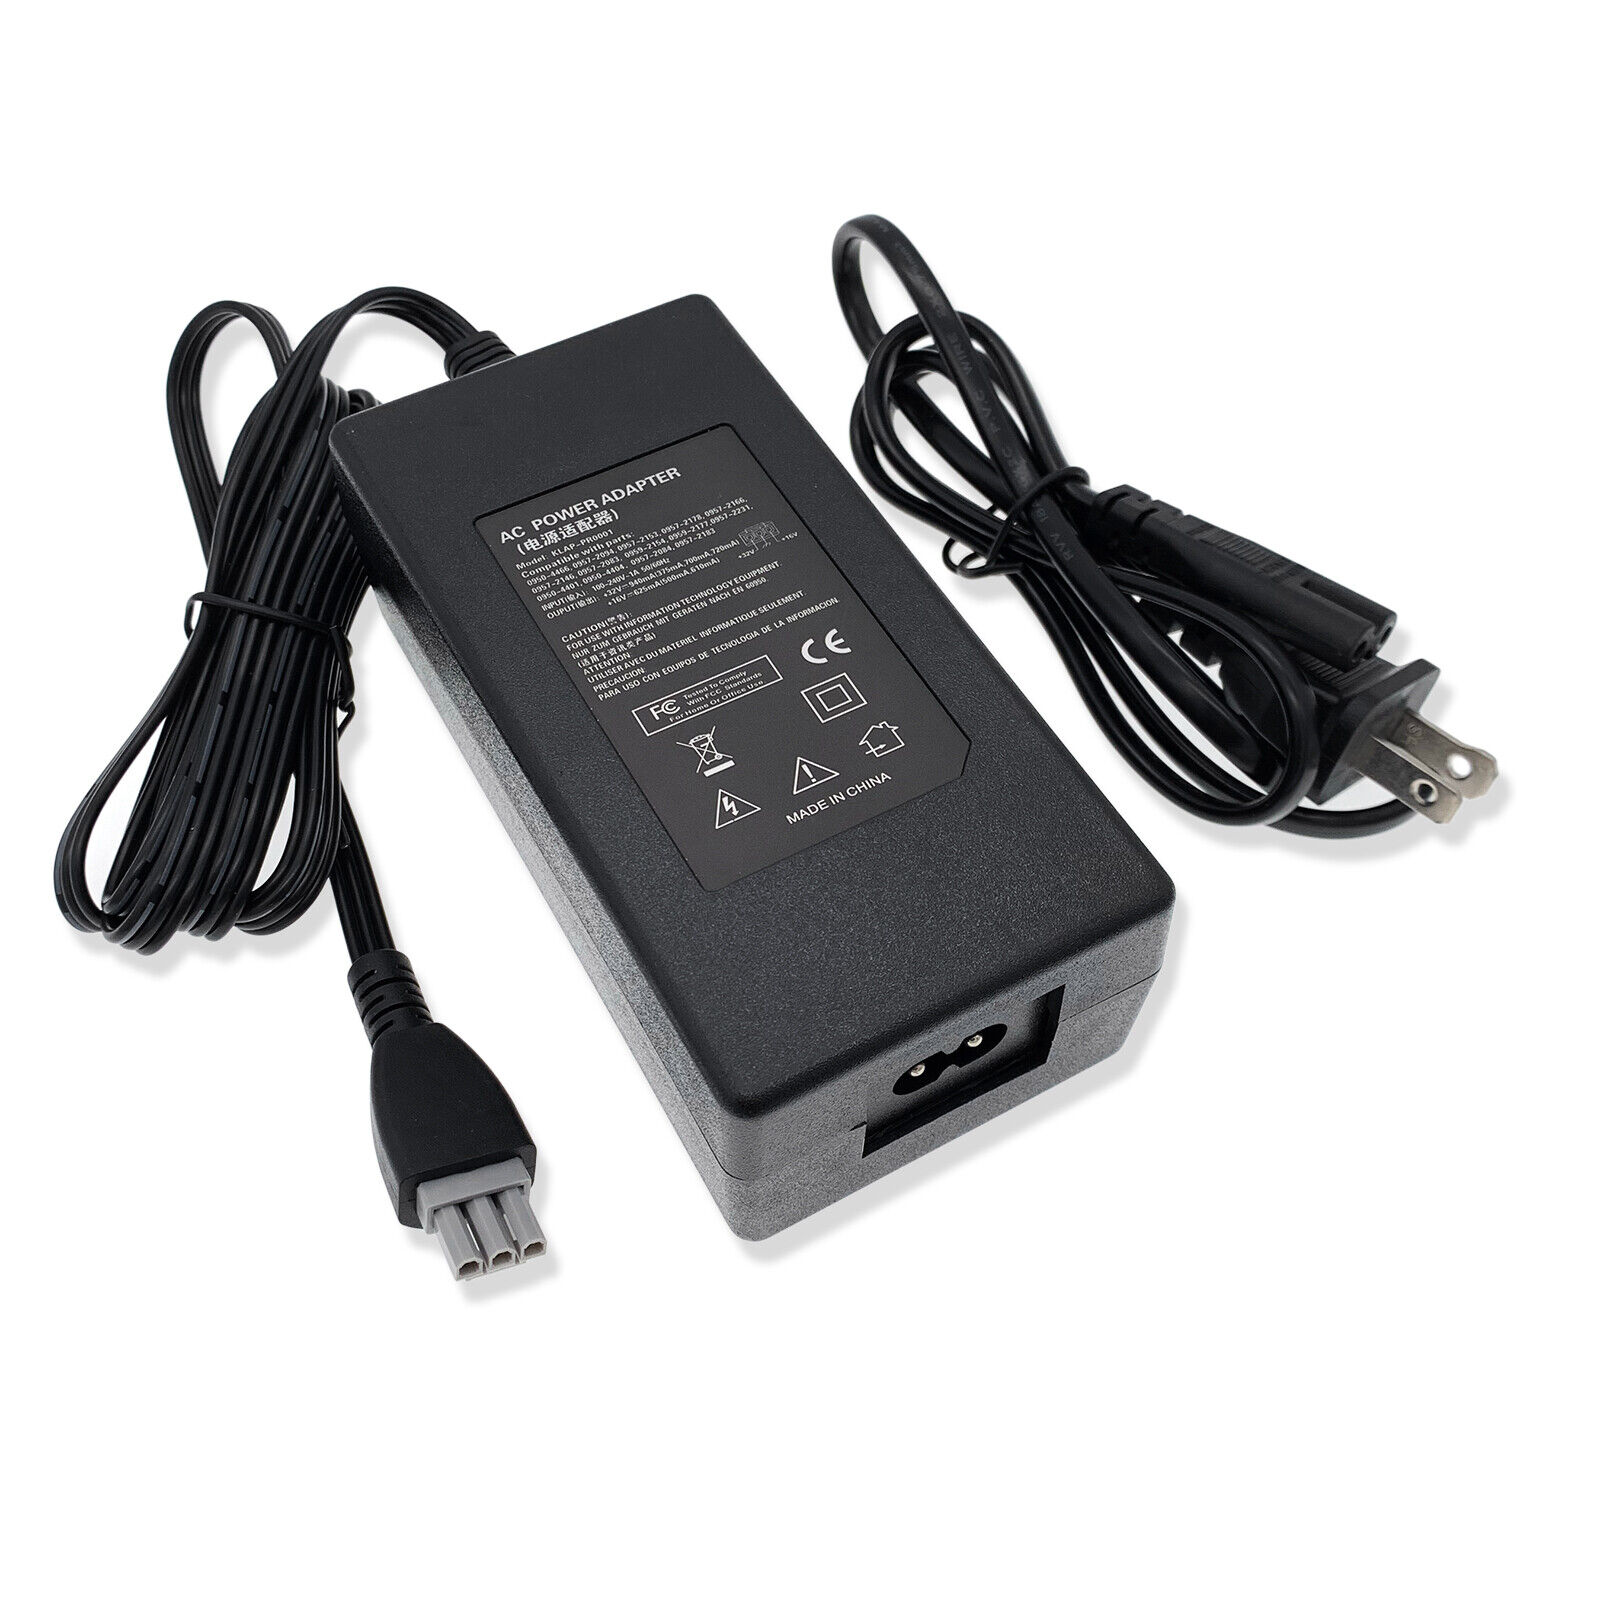 New AC Adapter Power Supply Cord For HP Photosmart C4480 C4485 C4400 0950-4401